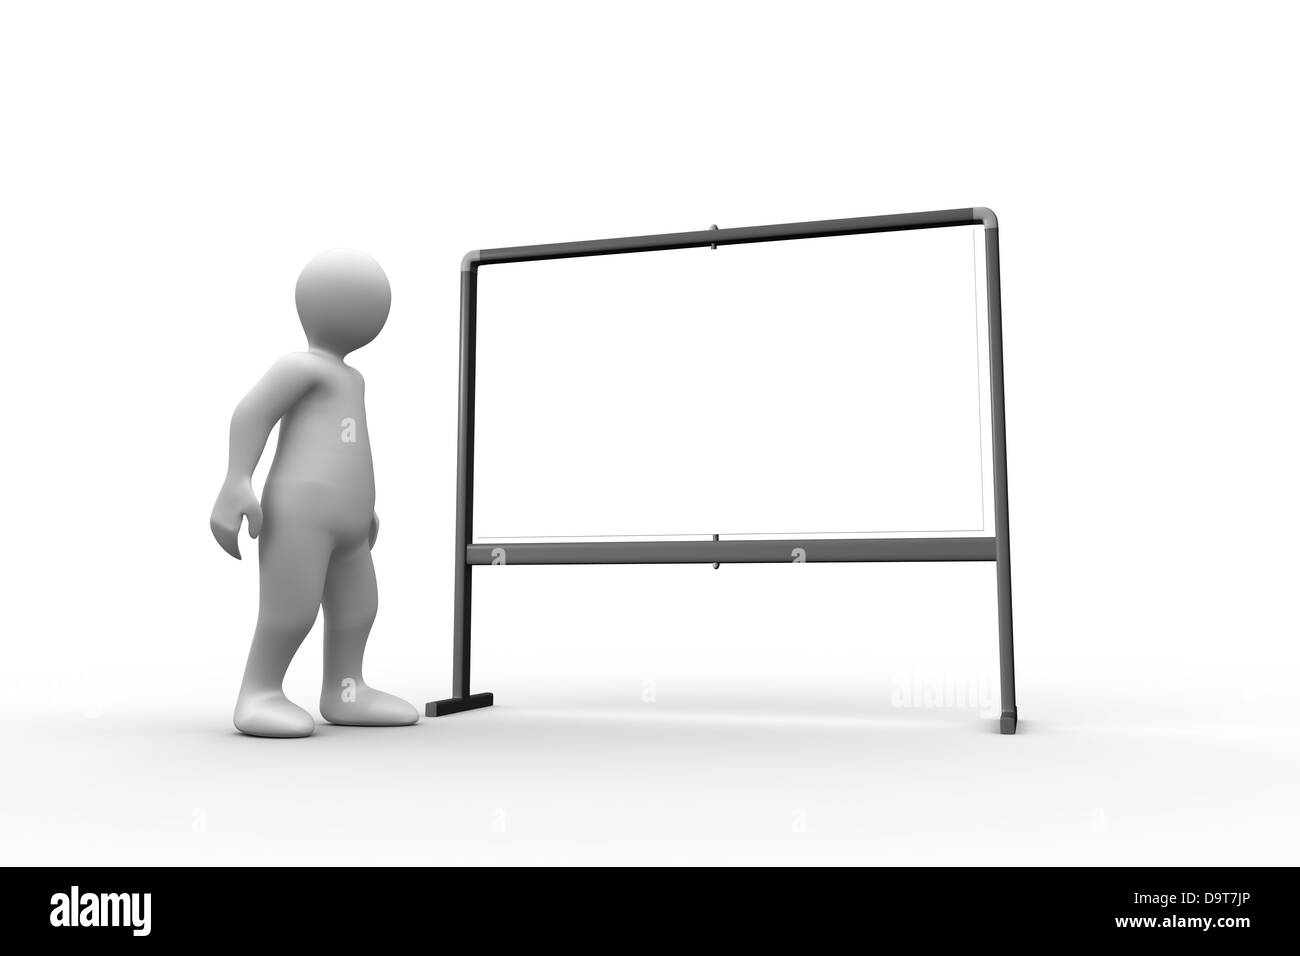 Standing white figure pointing to whiteboard Stock Photo